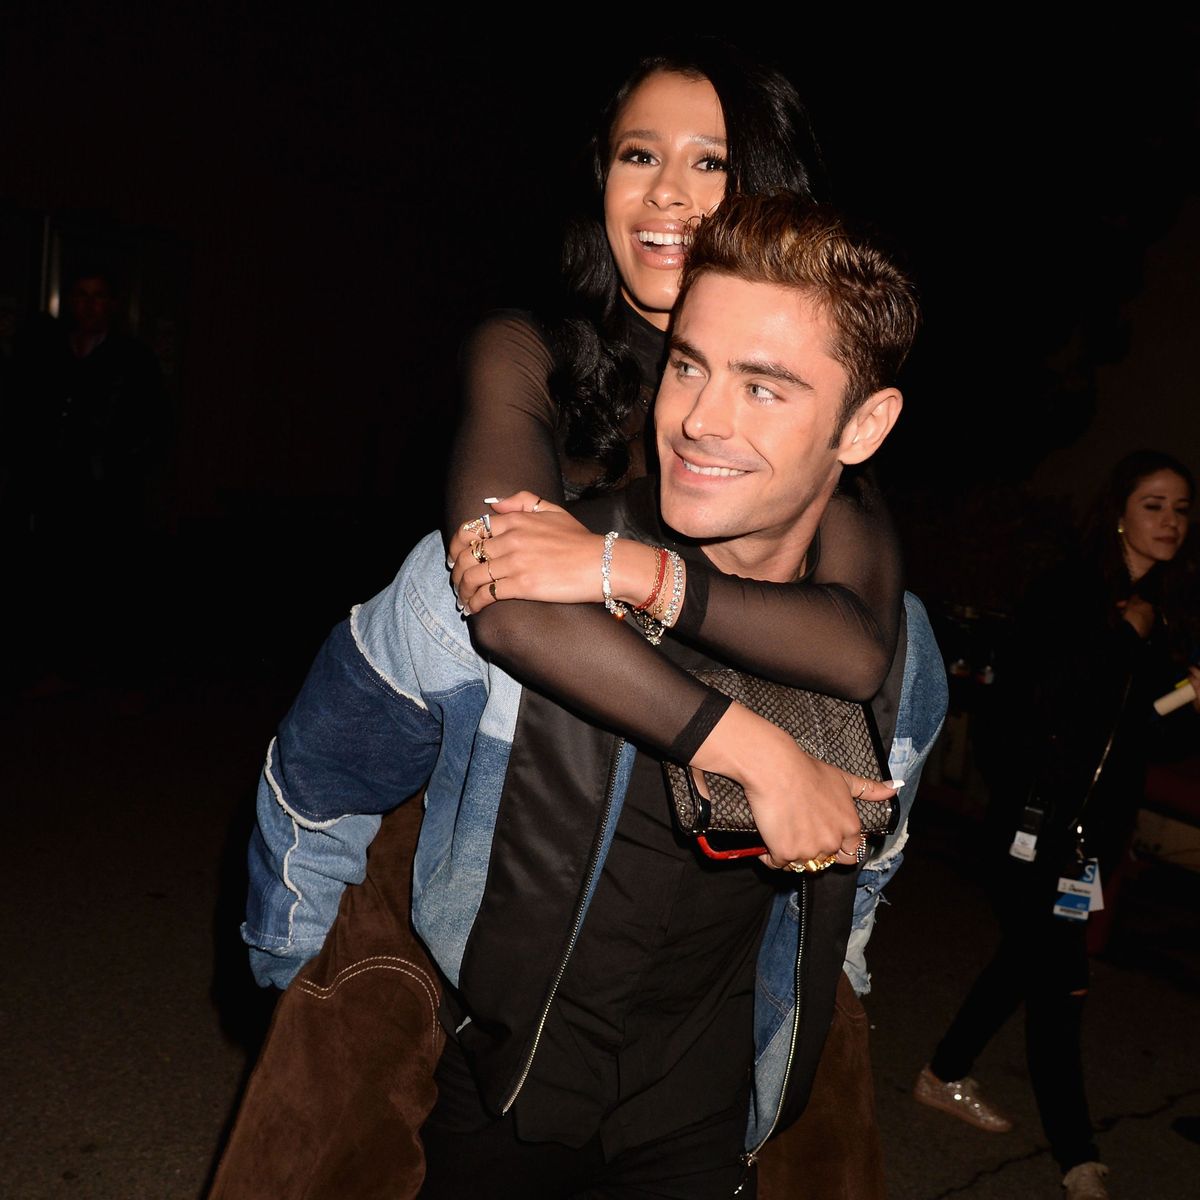 It's Official: Zac Efron and Sami Miro Have Broken Up